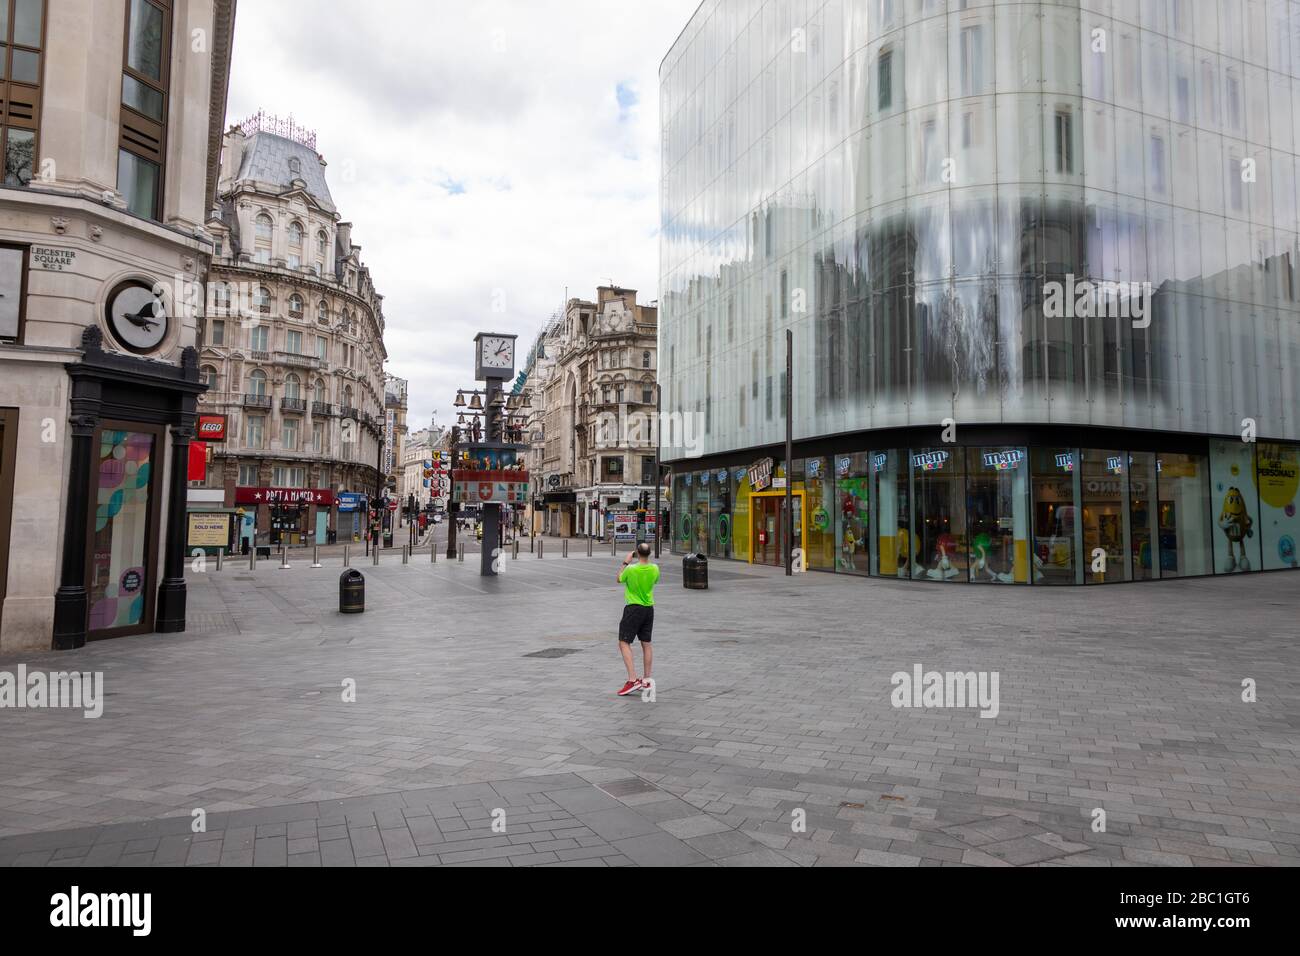 A deserted Leicester Square in Central London during the corona virus outbreak.There is a lone runner who has stopped to take photos. Stock Photo